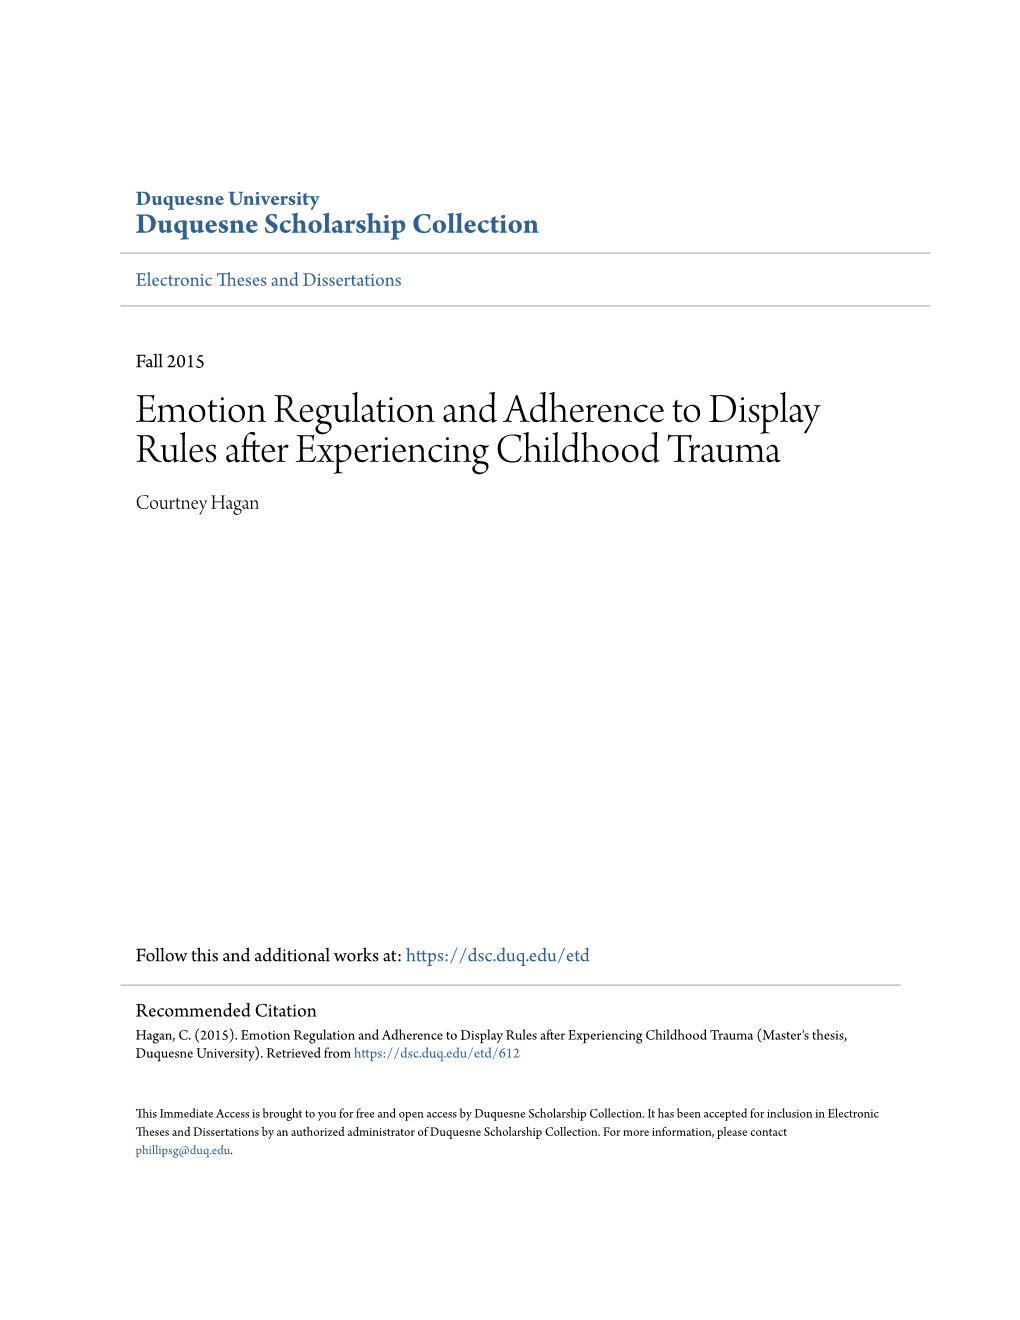 Emotion Regulation and Adherence to Display Rules After Experiencing Childhood Trauma Courtney Hagan